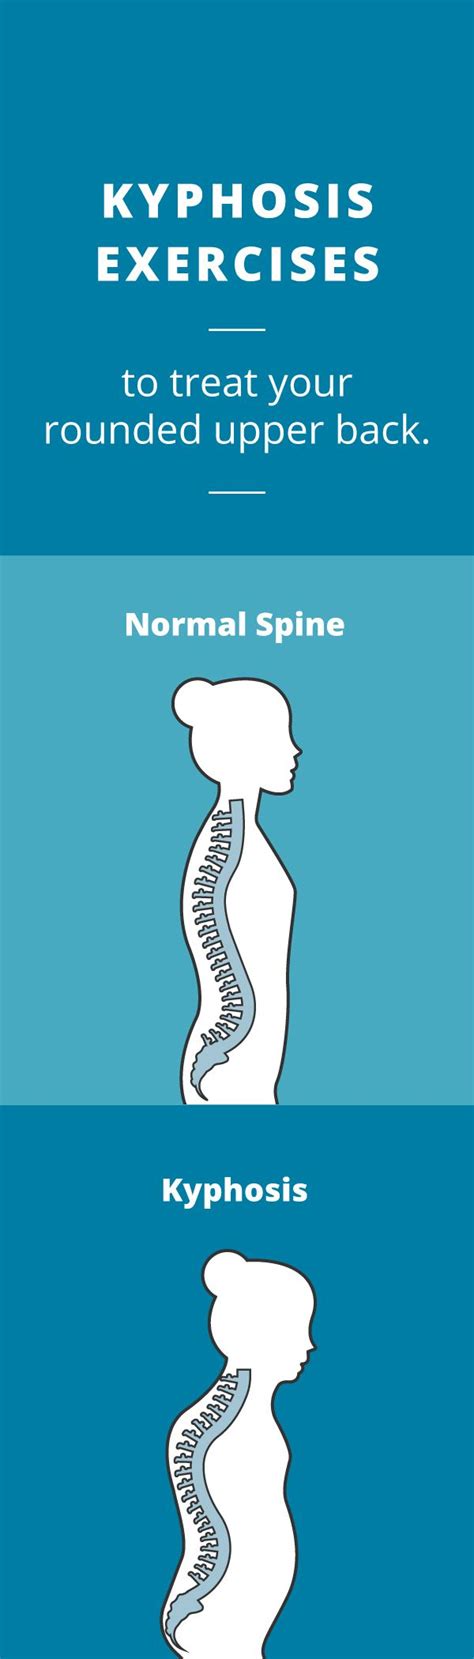 Kyphosis Exercises Treat A Rounded Upper Back Kyphosis Exercises